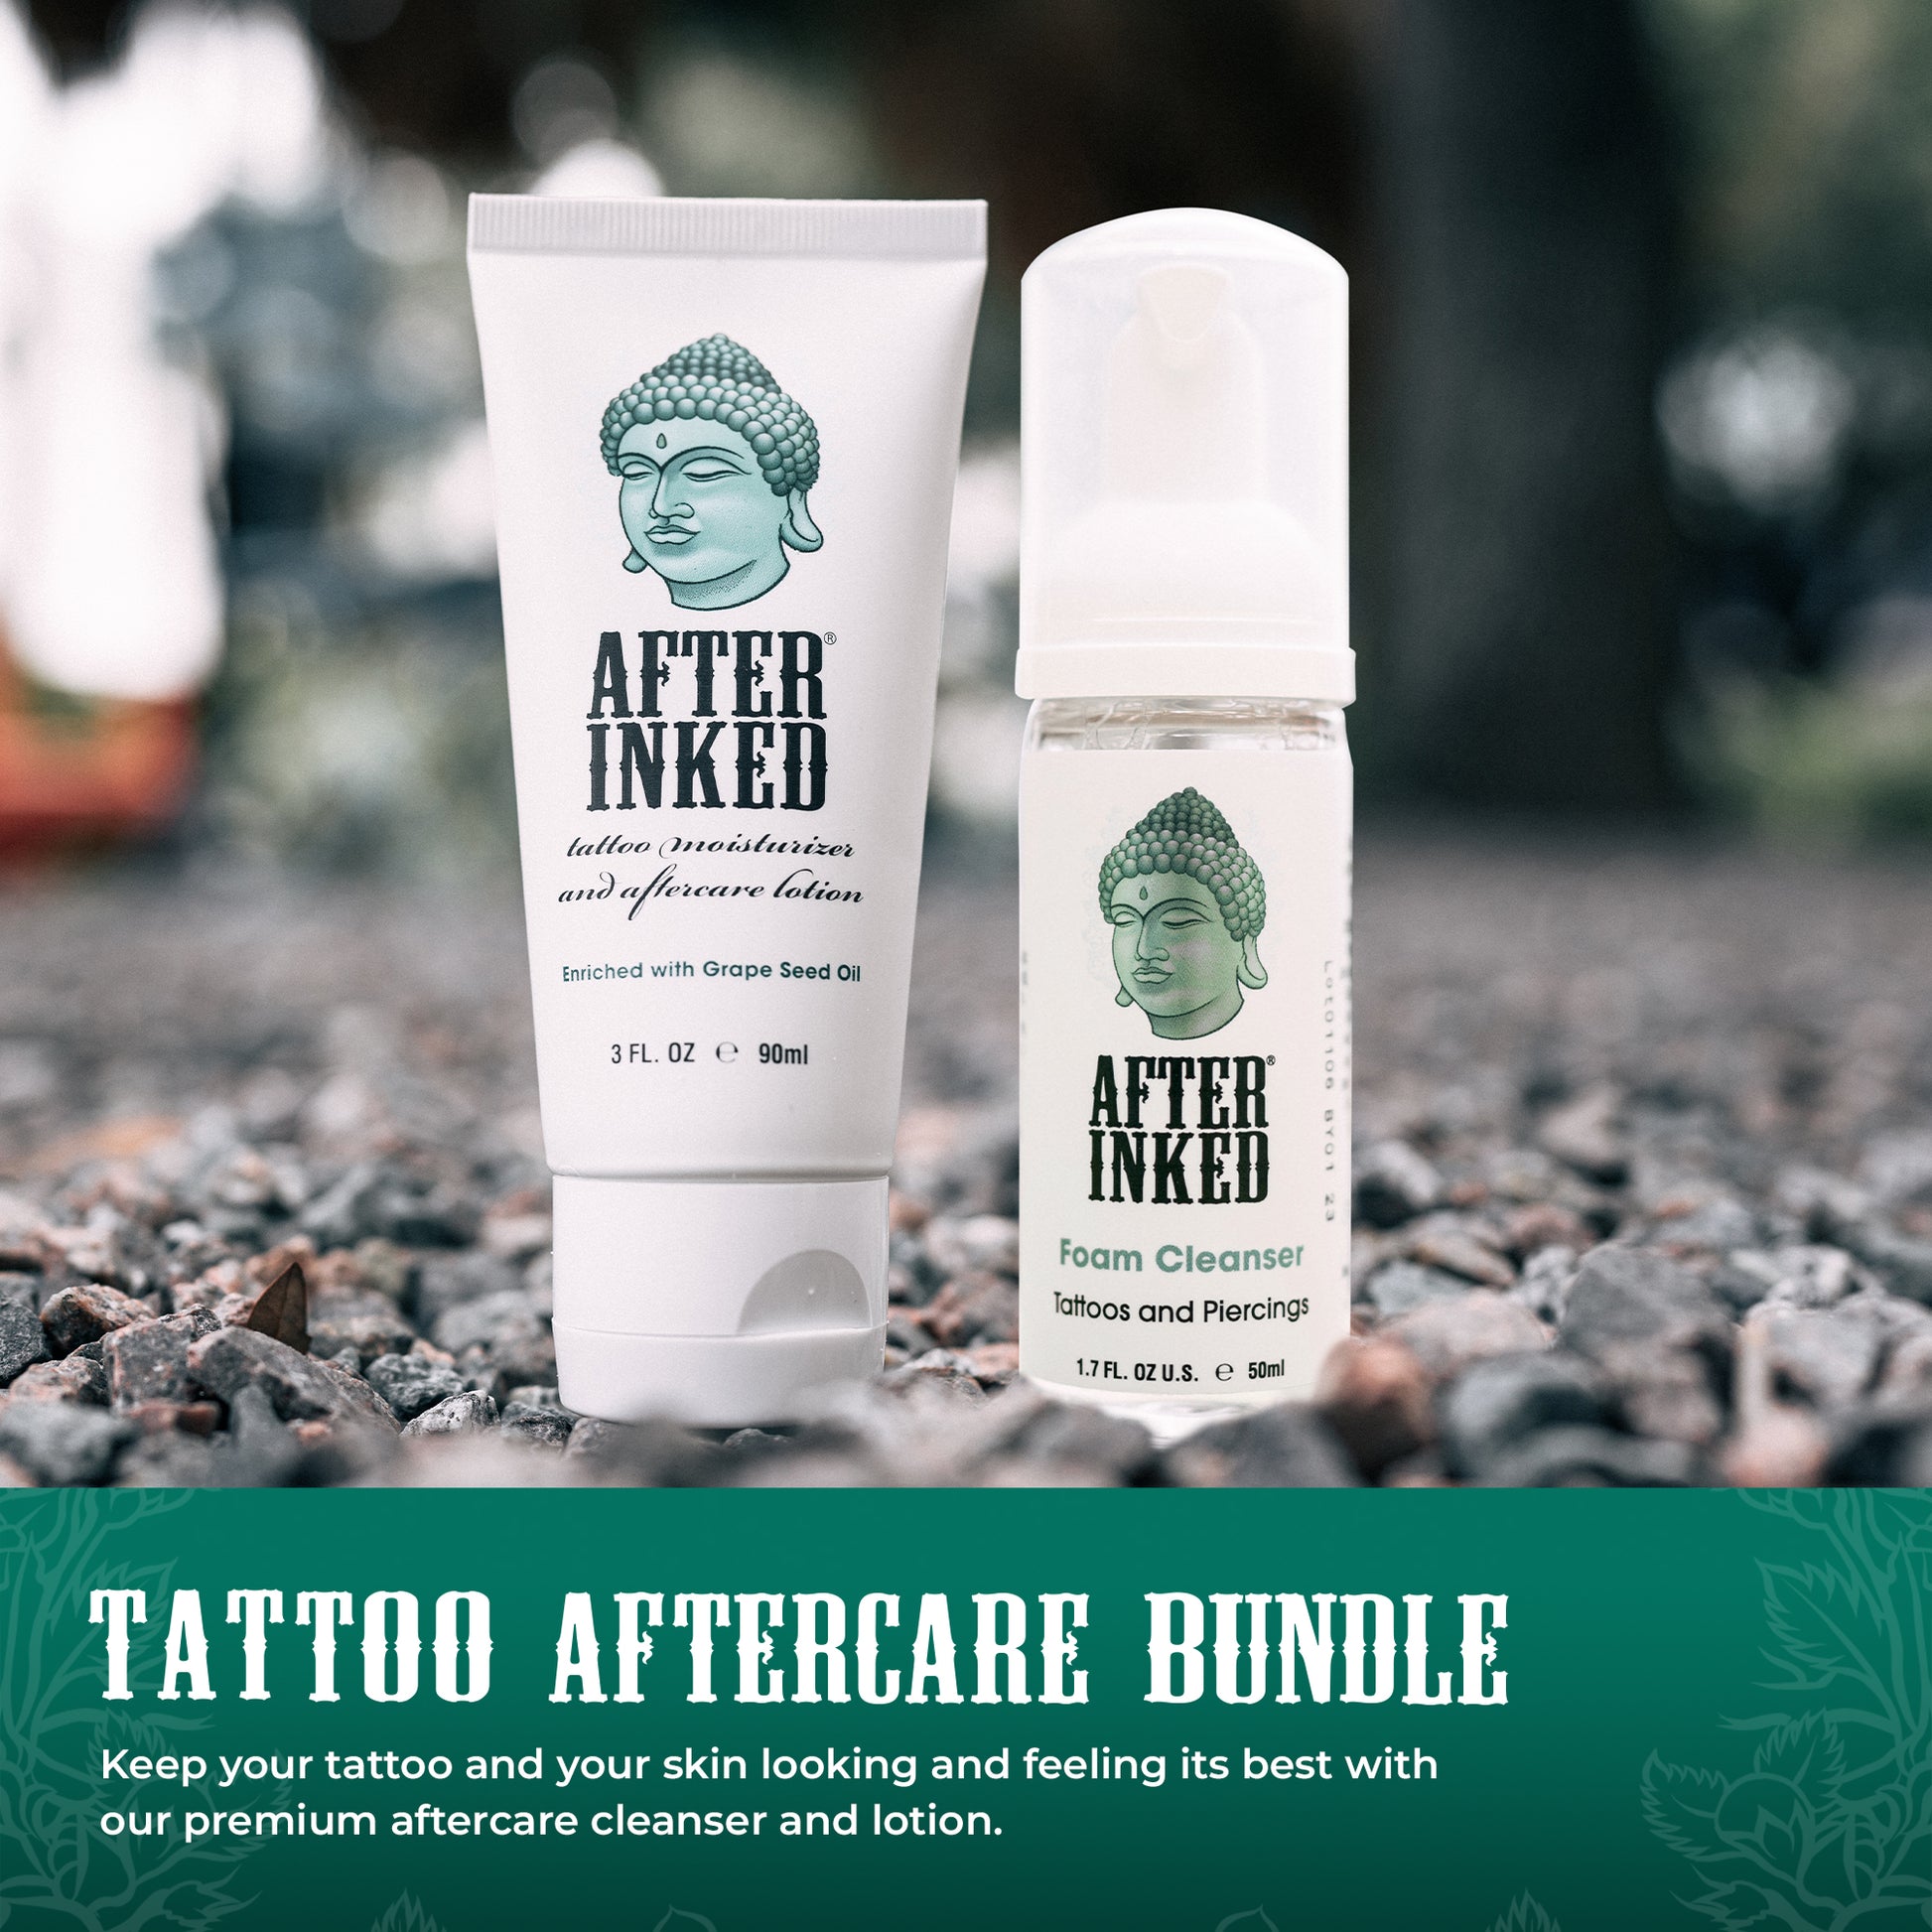 Tattoo aftercare bundle. Keep your tattoo and your skin looking and feeling its best with our premium aftercare cleanser and lotion